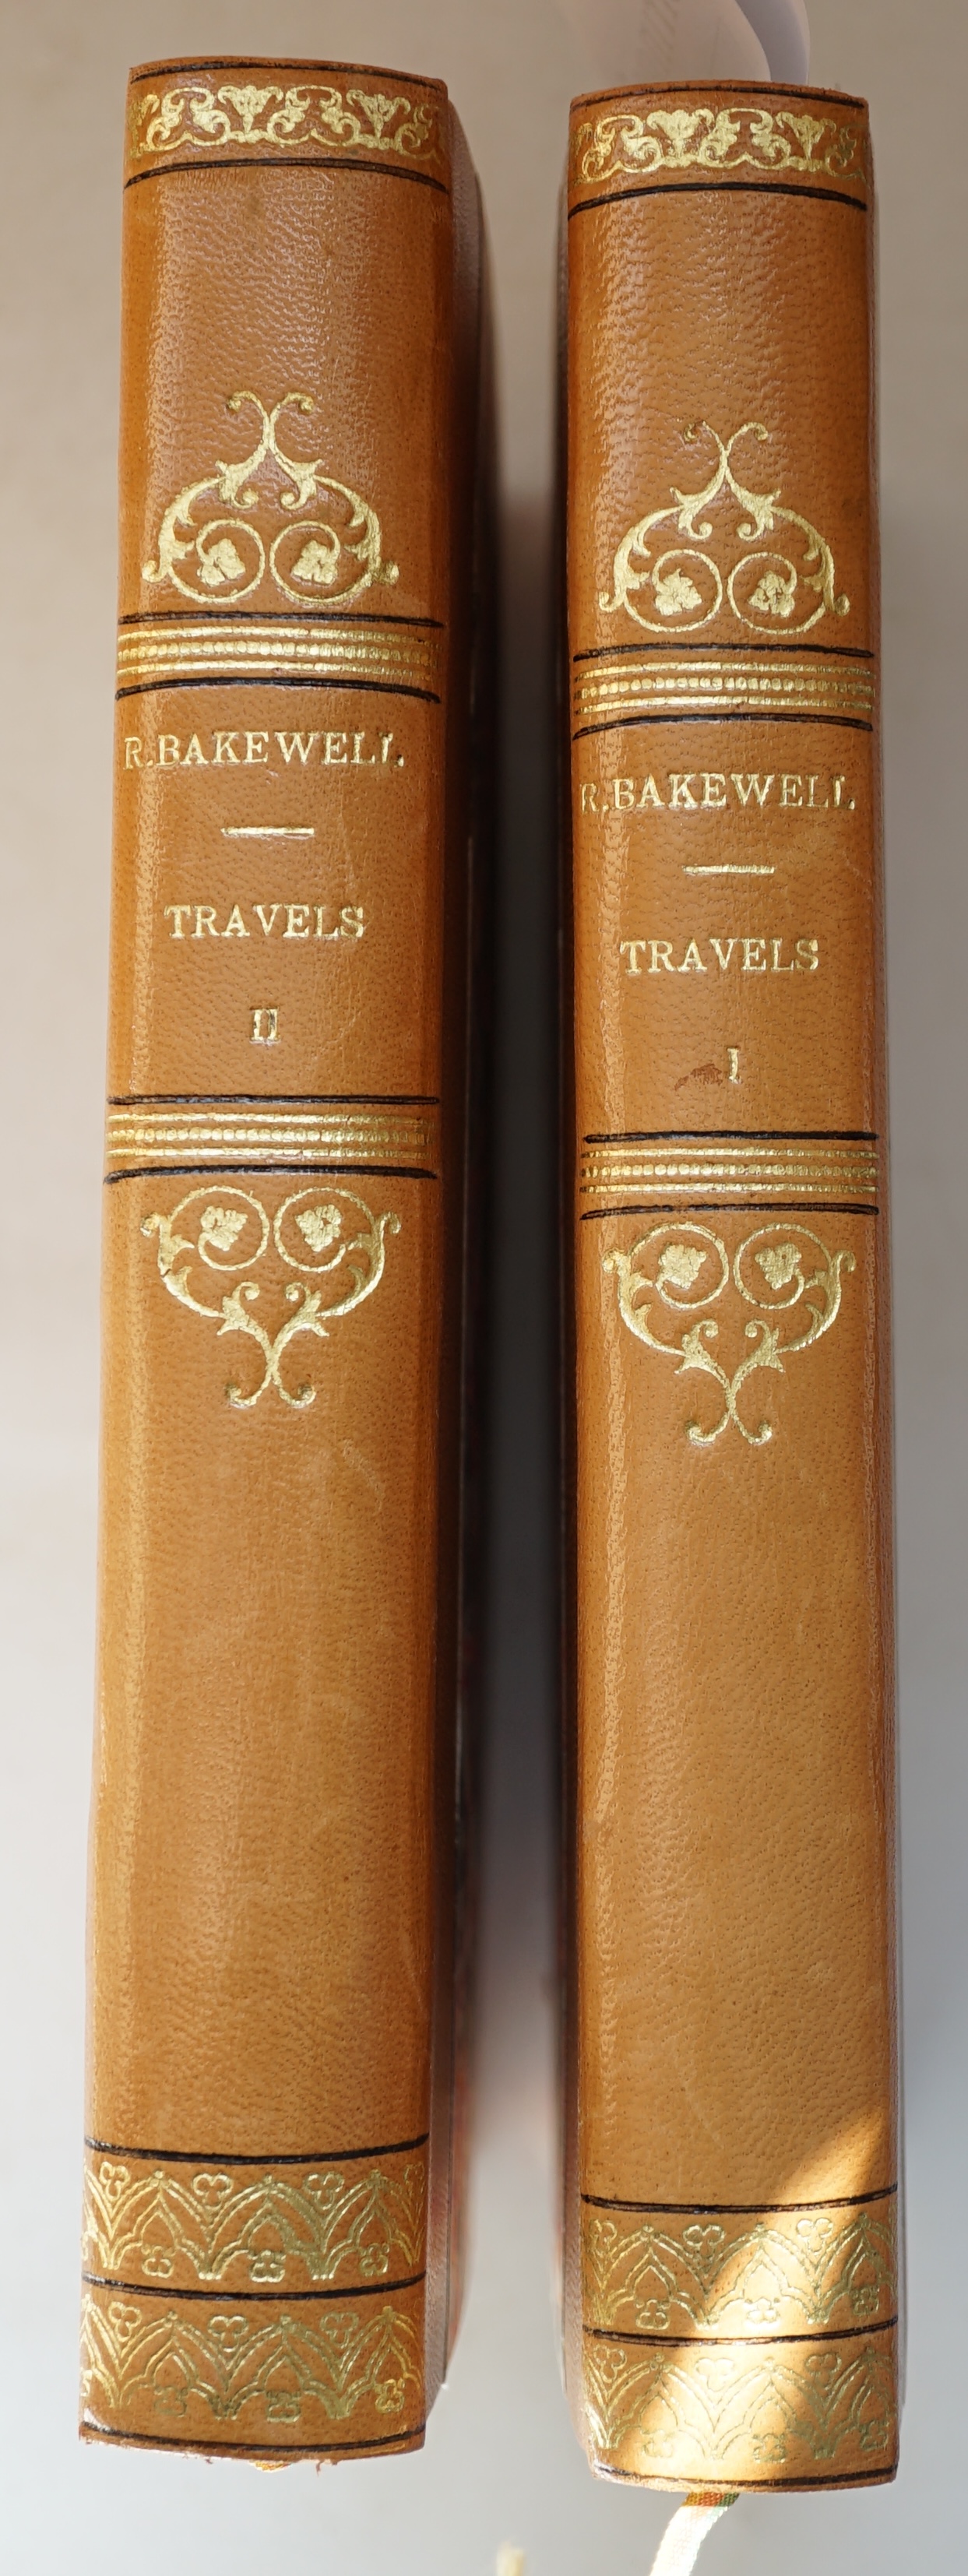 Bakewell, Robert - Travels comprising Observations made during a Residence in the Tarentaise and Various Parts of the Grecian and Penine Alps and in Switzerland and Auverge in the years 1820,1821 and 1822, 2 vols, 1st ed